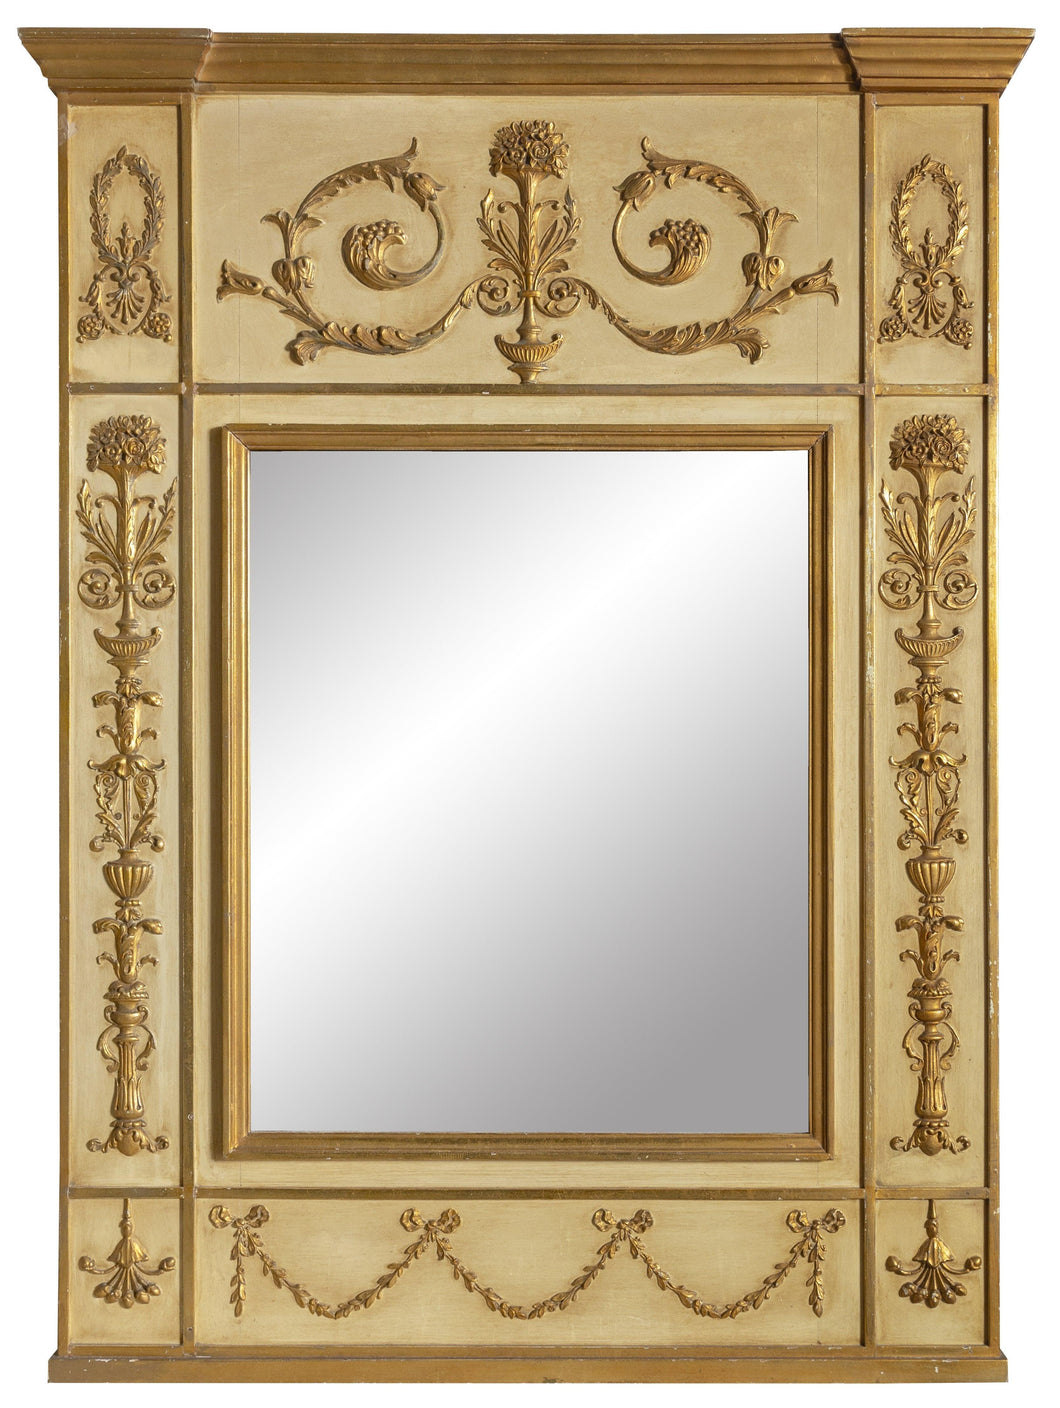 Empire Style Floral Motif Mirror Home Decor | Furniture,{{product.type}}